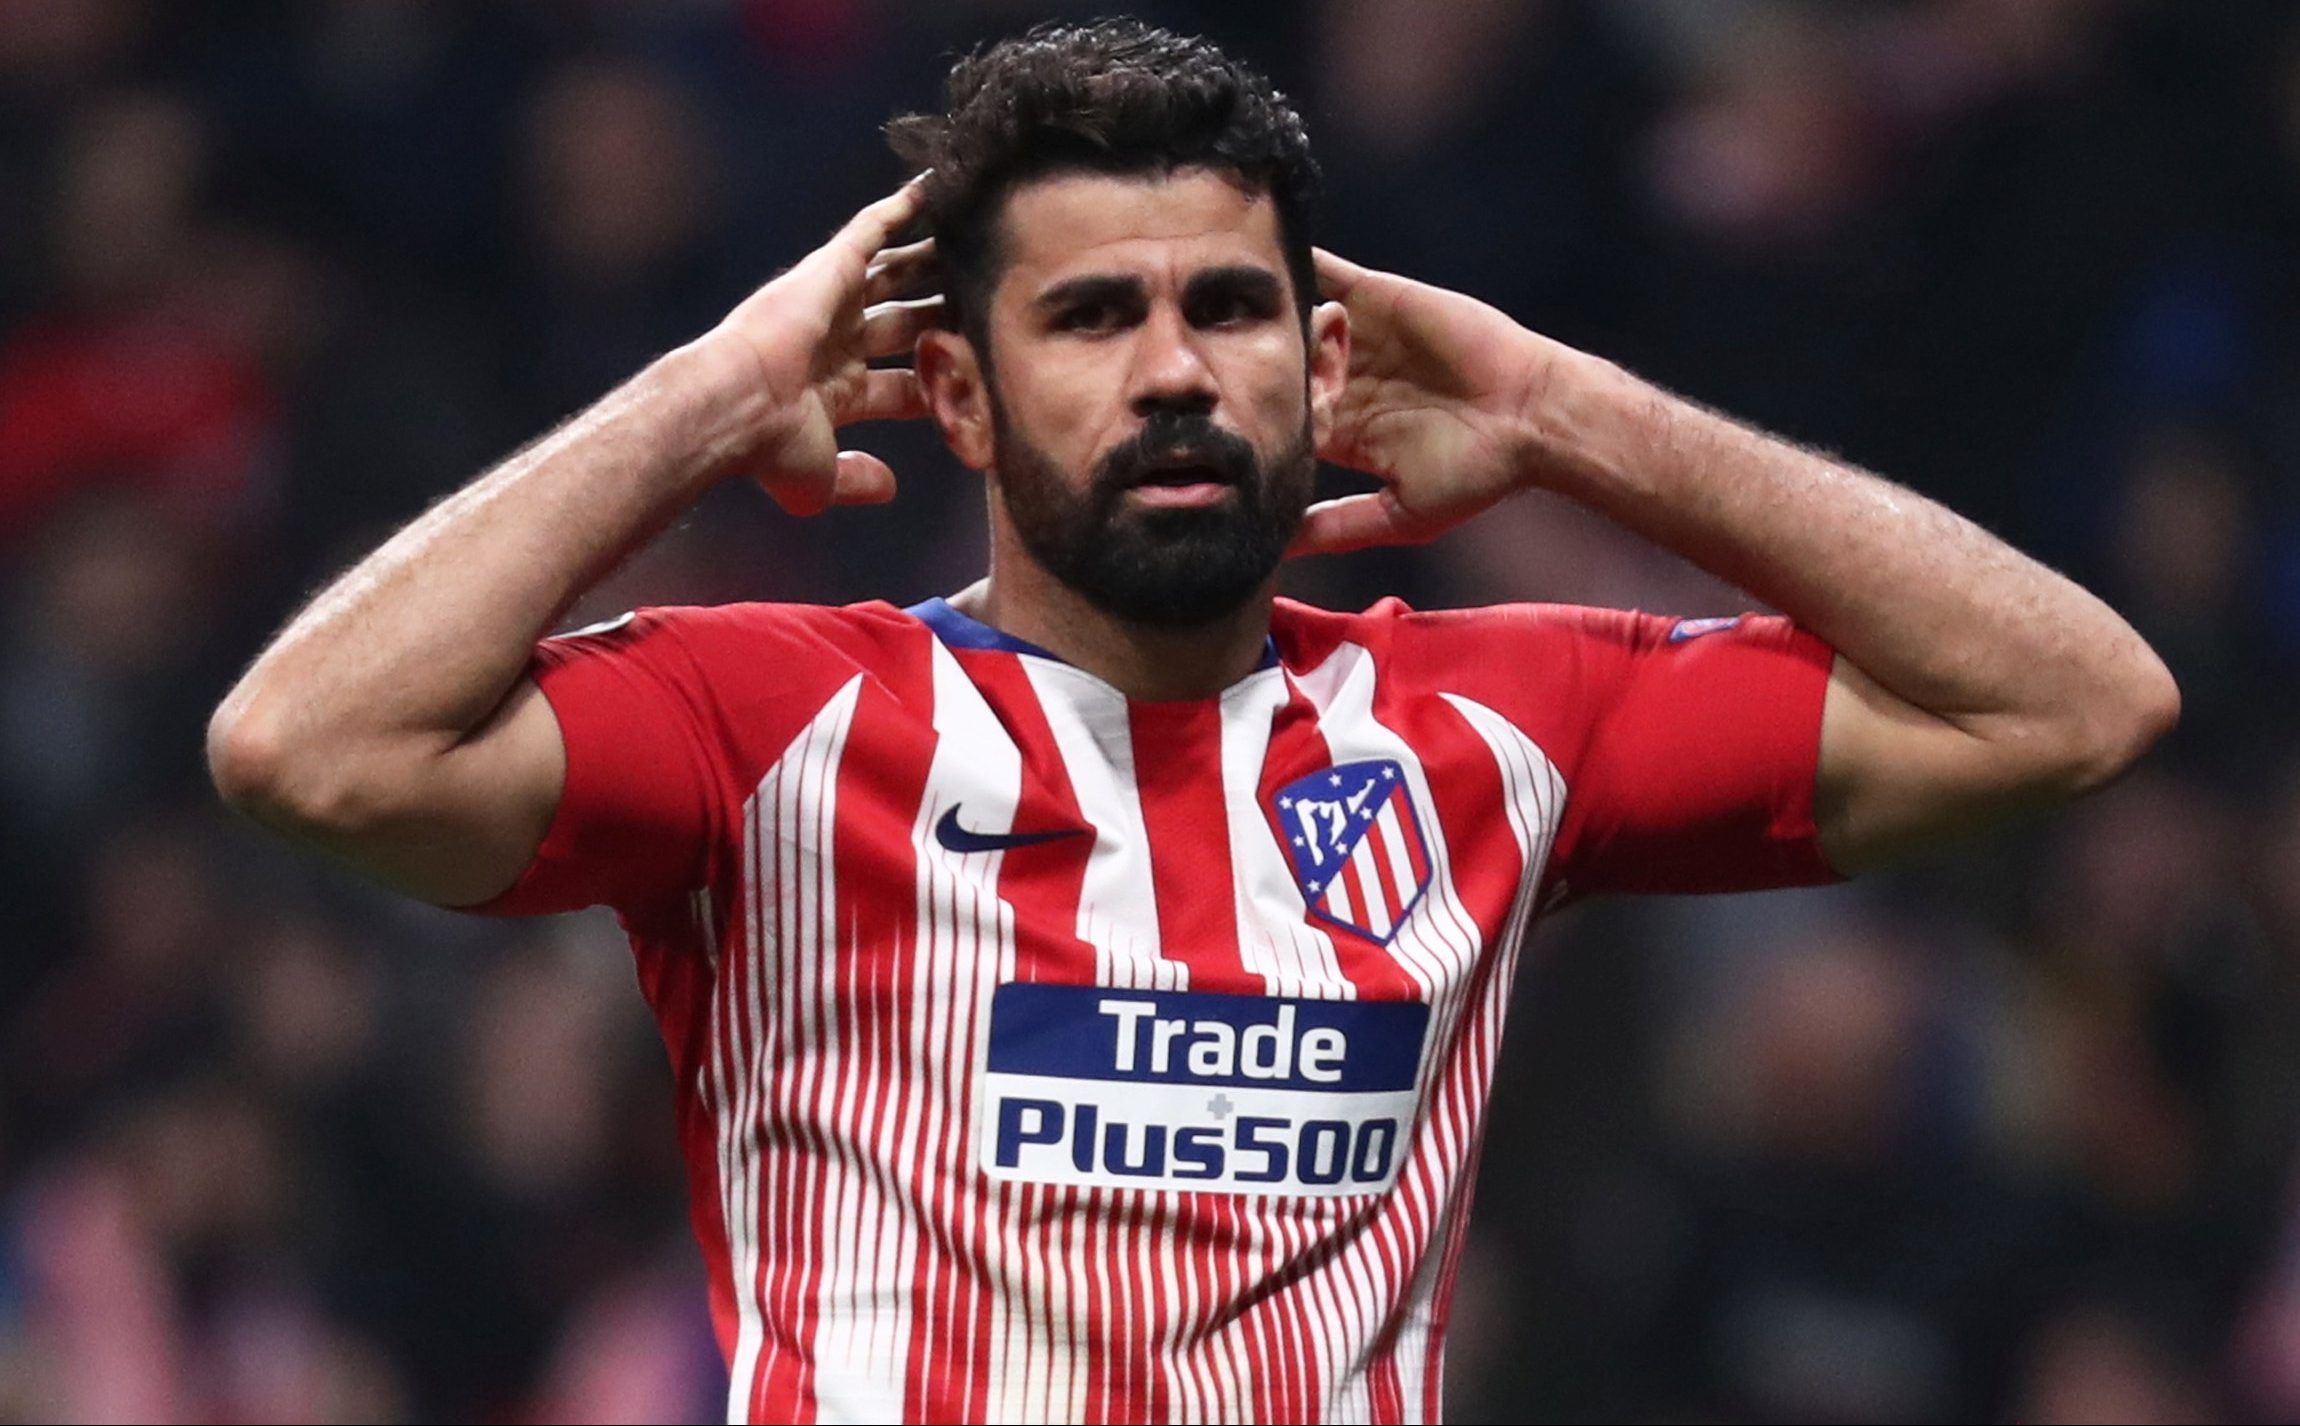 Soccer Football - Champions League - Round of 16 First Leg - Atletico Madrid v Juventus - Wanda Metropolitano, Madrid, Spain - February 20, 2019  Atletico Madrid's Diego Costa reacts to a missed chance                 REUTERS/Sergio Perez